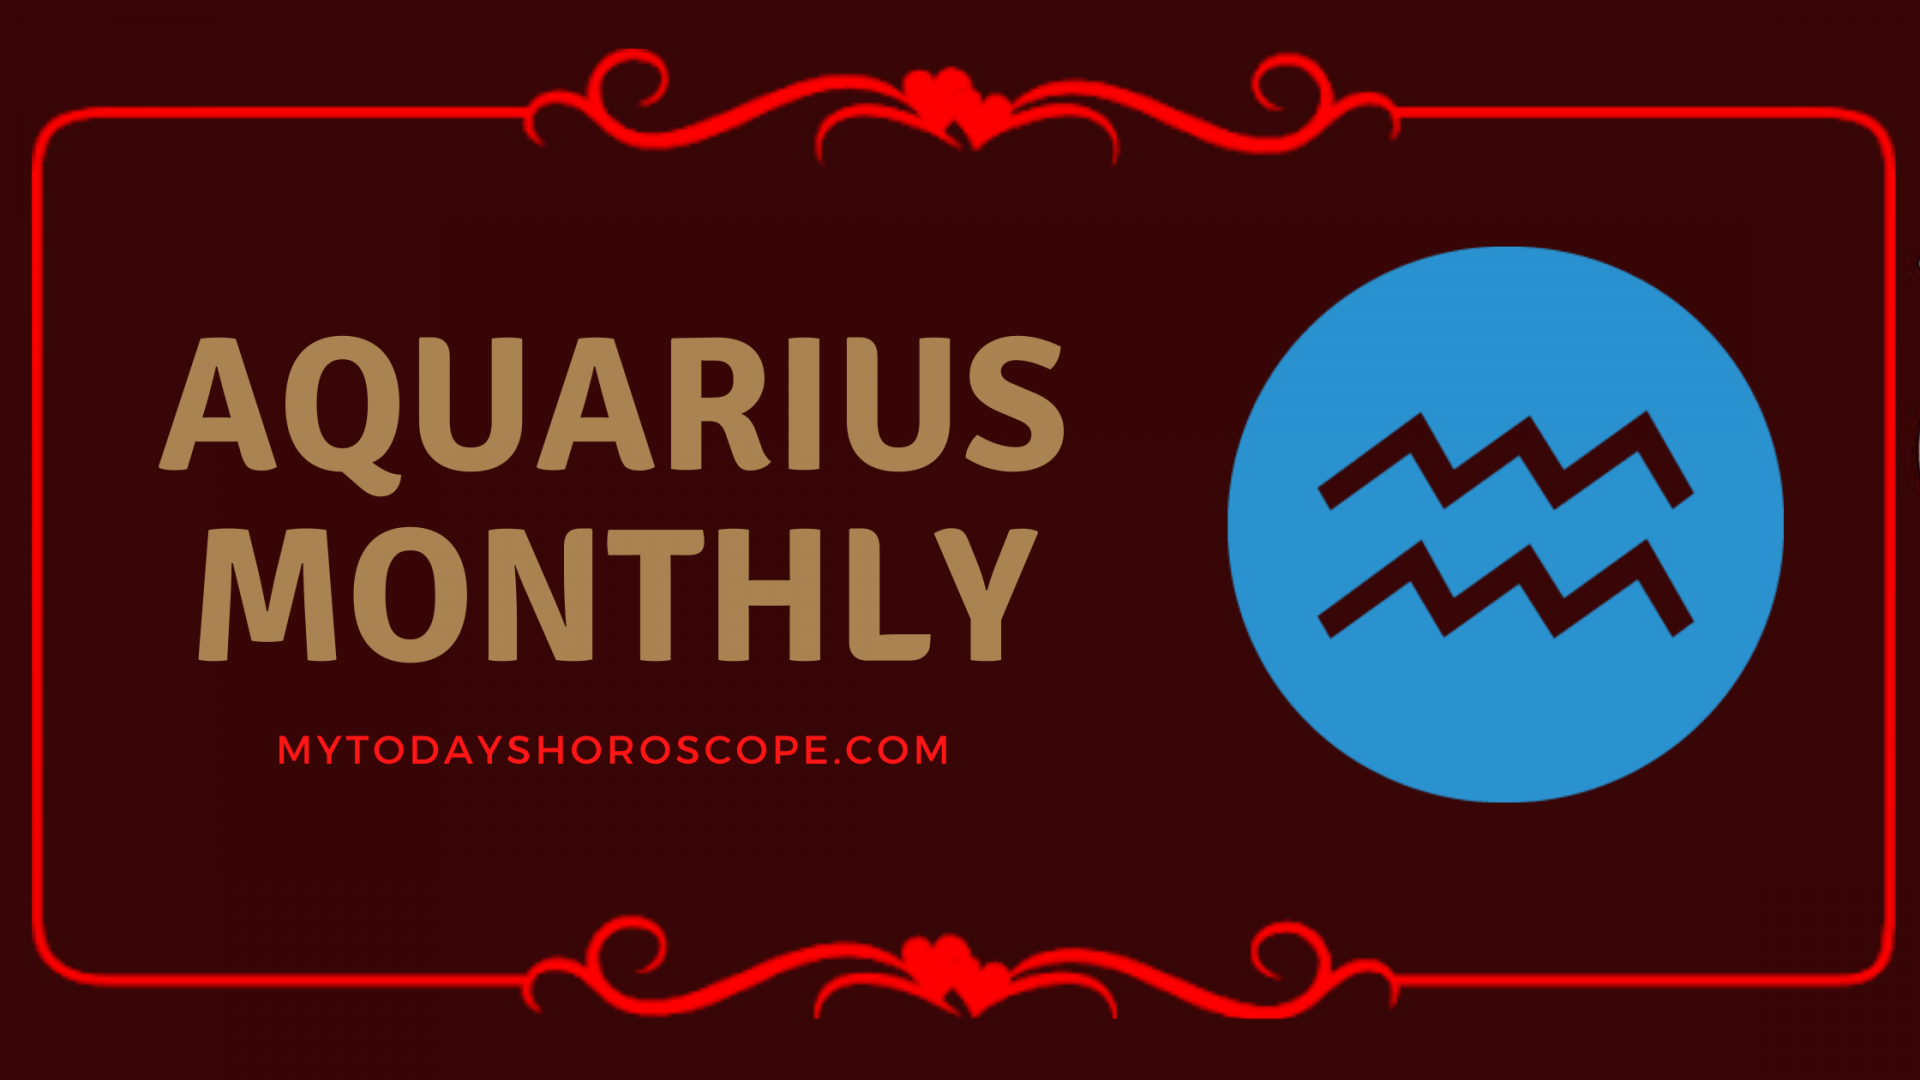 AQUARIUS Horoscope April 2021 - Monthly Predictions for Love, Health, Career and Money